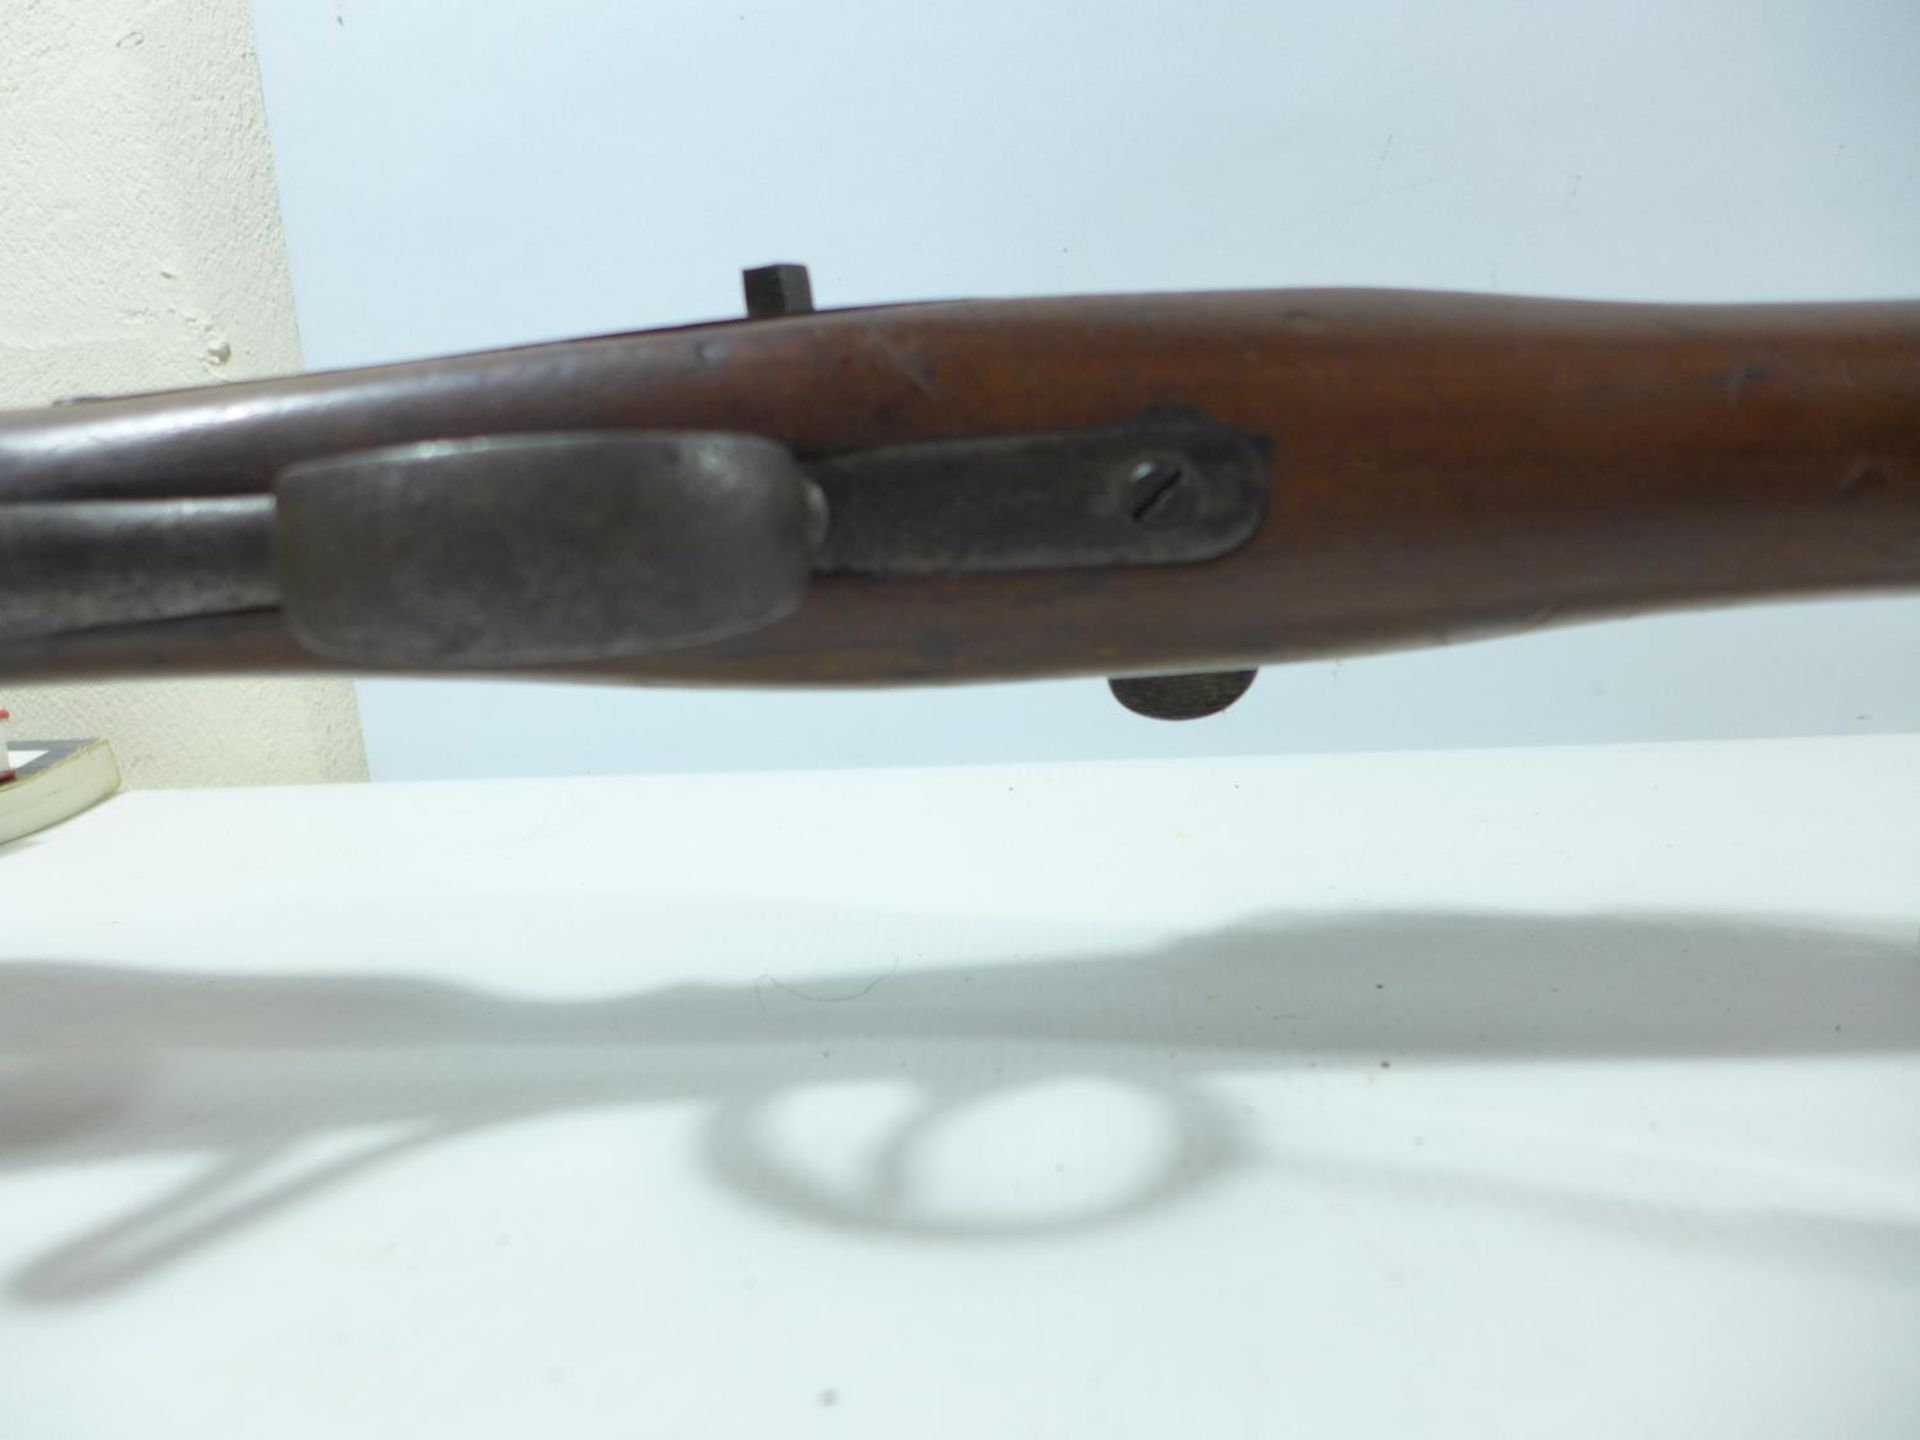 A MID 19TH CENTURY OBSOLETE CALIBRE WERNDL-HOLUB RIFLE, 83CM BARREL, LACKING HAMMER, TOTAL LENGTH - Image 11 of 11